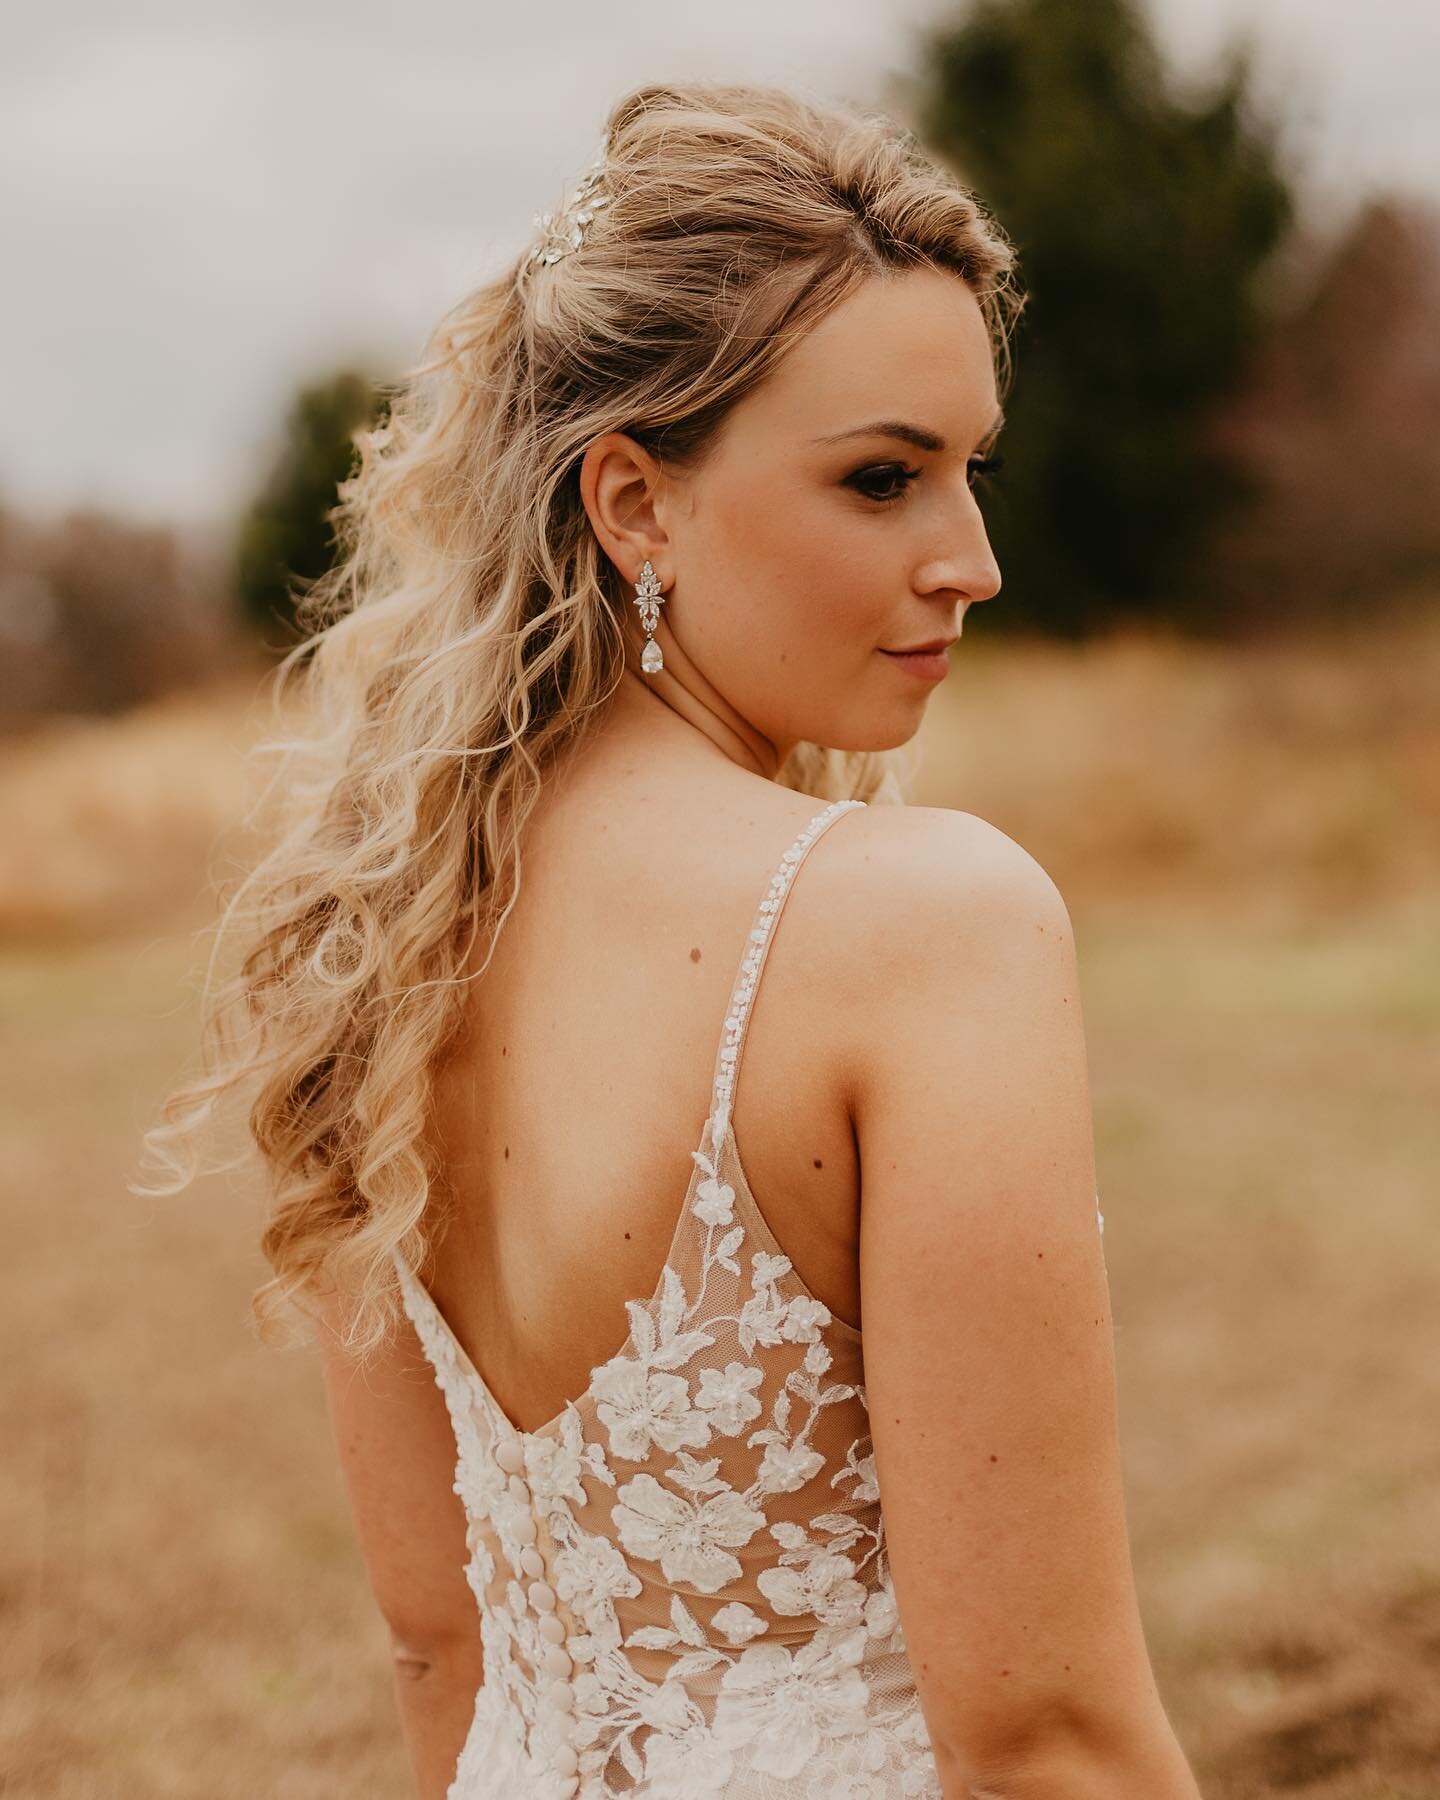 Can we just talk about how gorgeous this bride is!?